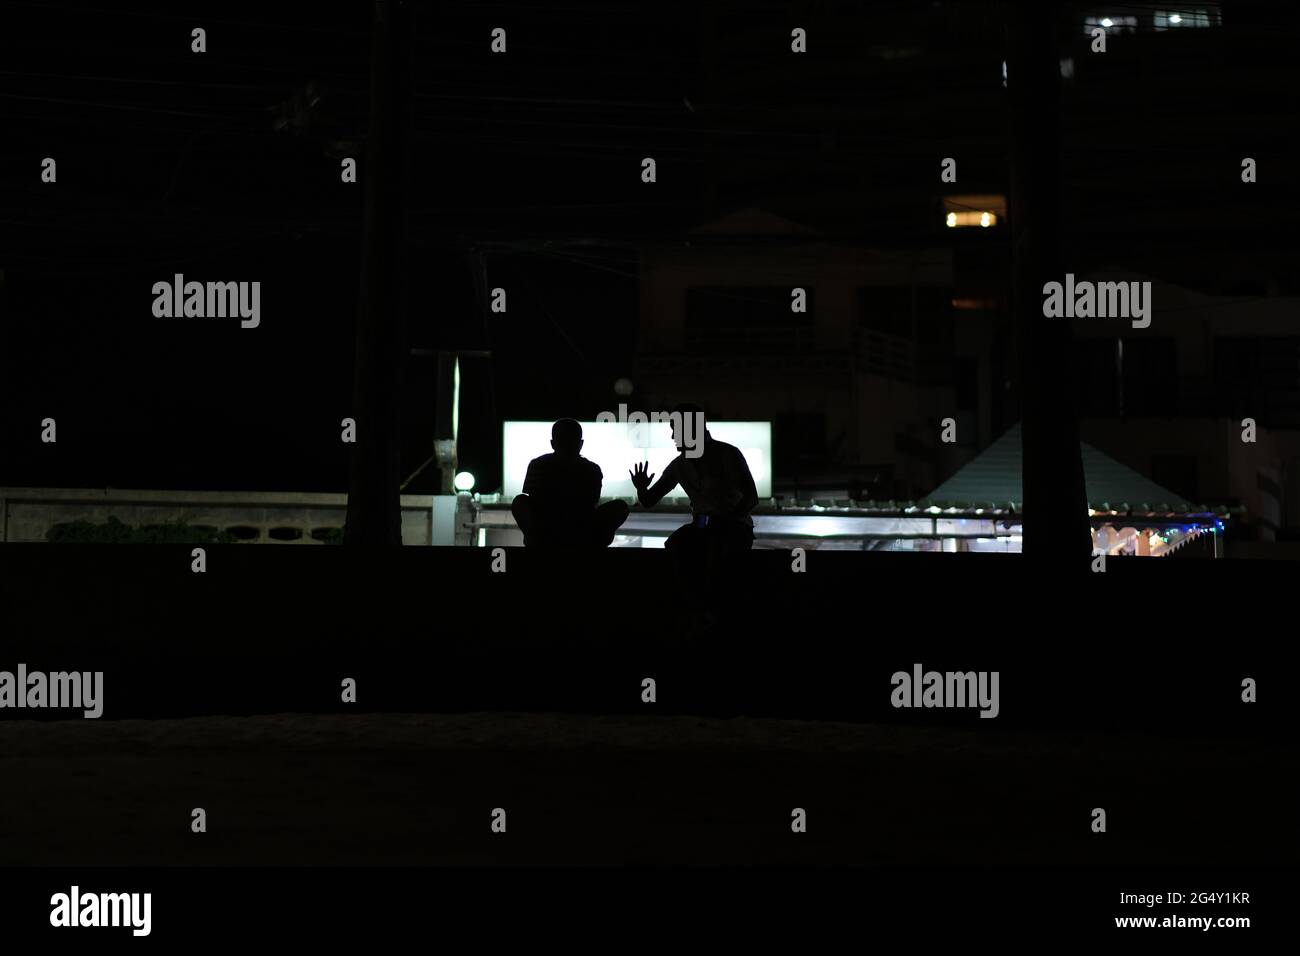 A dialogue of two men, visible only as silhouettes, with one hearing intrigued and another one gesturing Stock Photo